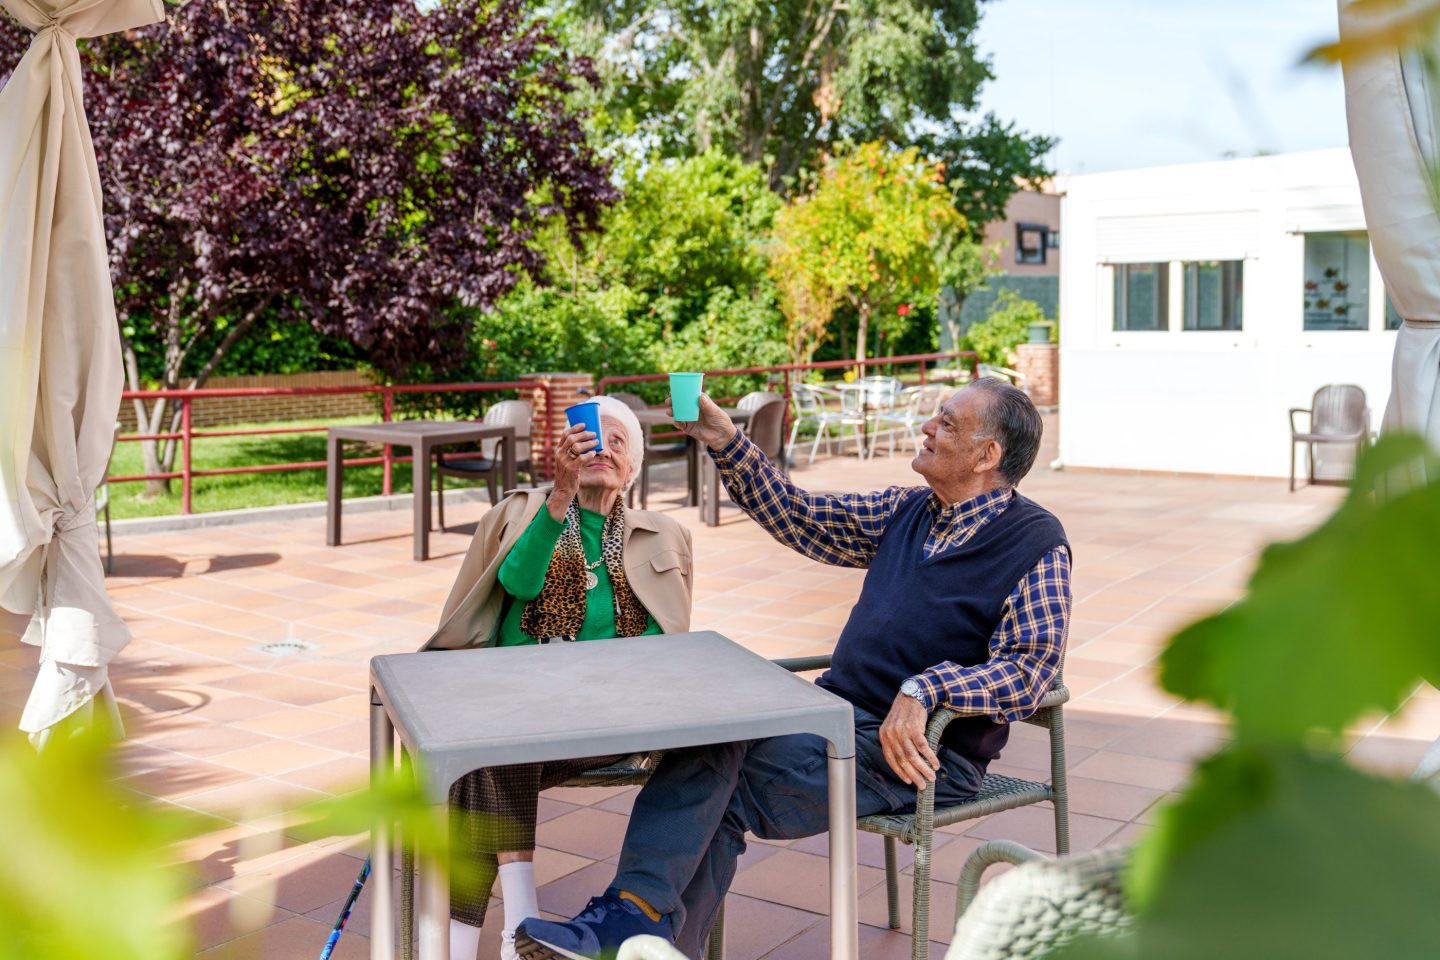 Joyful elderly man and woman sitting in a well-manicured garden at a senior care facility, happily toasting with vibrant glasses on a sunny day.